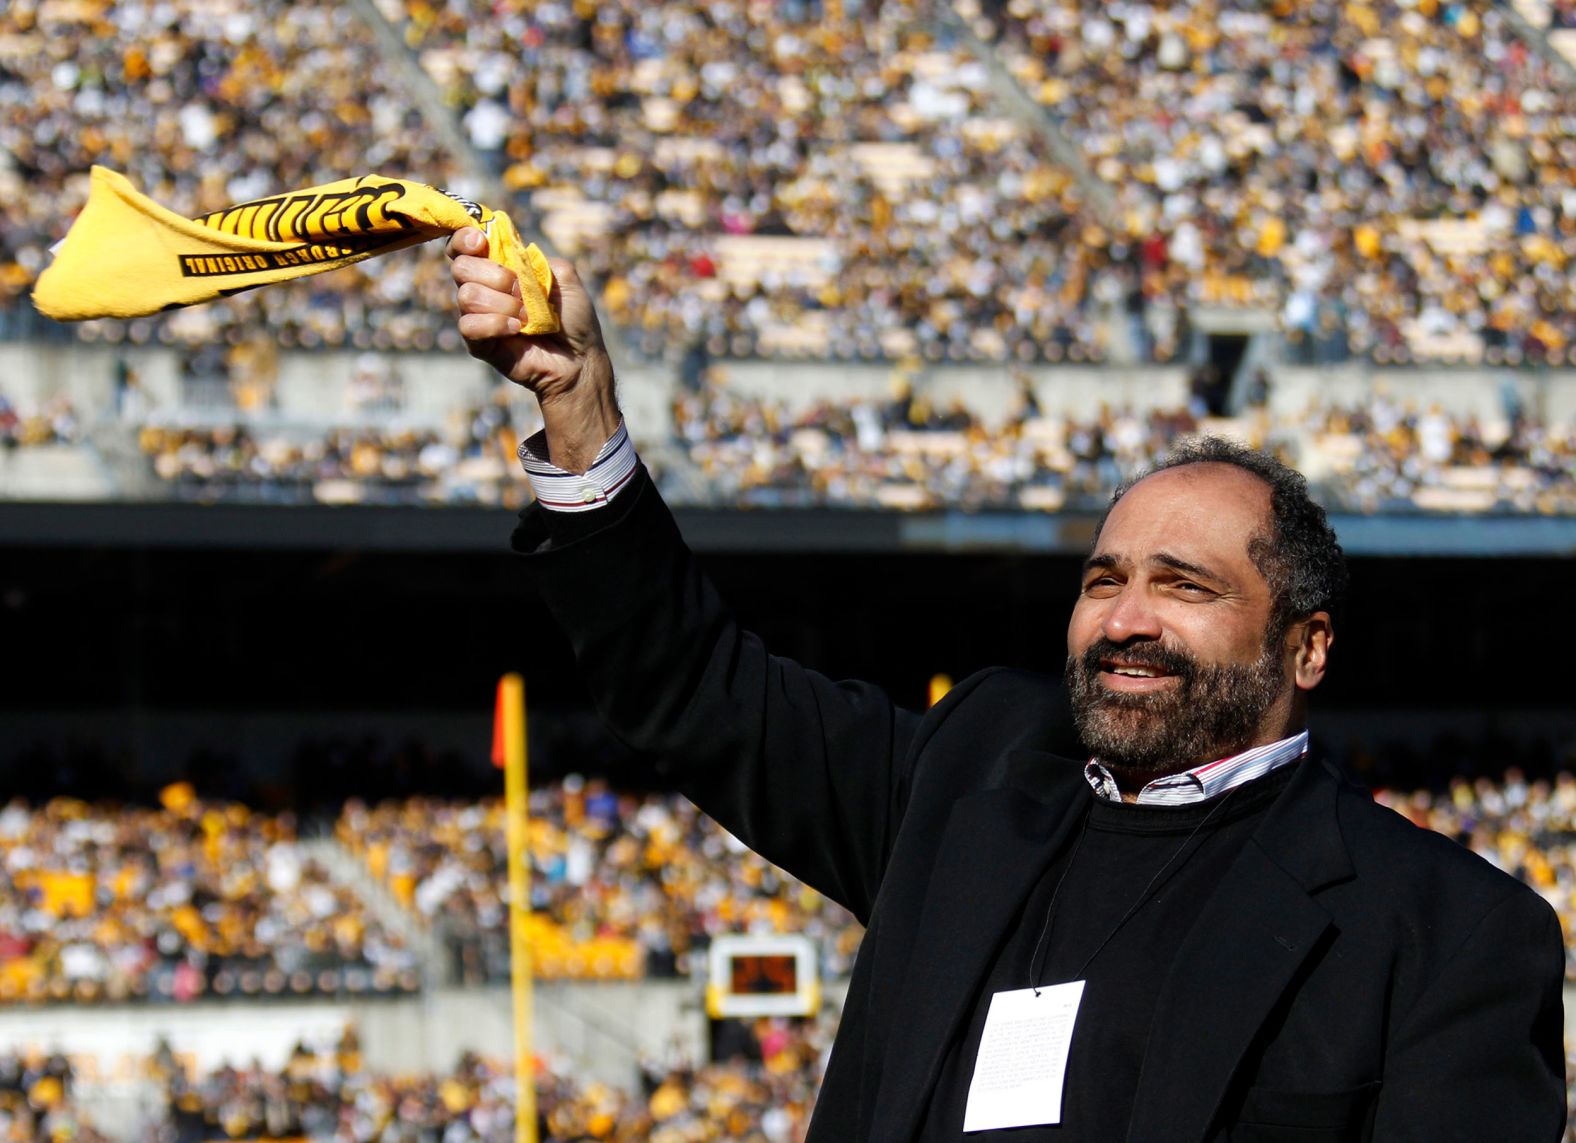 Pittsburgh Steelers great <a href="index.php?page=&url=https%3A%2F%2Fwww.cnn.com%2F2022%2F12%2F21%2Fsport%2Fnfl-franco-harris-obit-spt-intl%2Findex.html" target="_blank">Franco Harris,</a> known for one of the most iconic plays in NFL history -- the <a href="index.php?page=&url=https%3A%2F%2Fwww.cnn.com%2F2019%2F09%2F21%2Fus%2Fnfl-greatest-play-immaculate-reception%2Findex.html" target="_blank">"Immaculate Reception"</a> -- died at the age of 72, the Pro Football Hall of Fame announced on December 21.